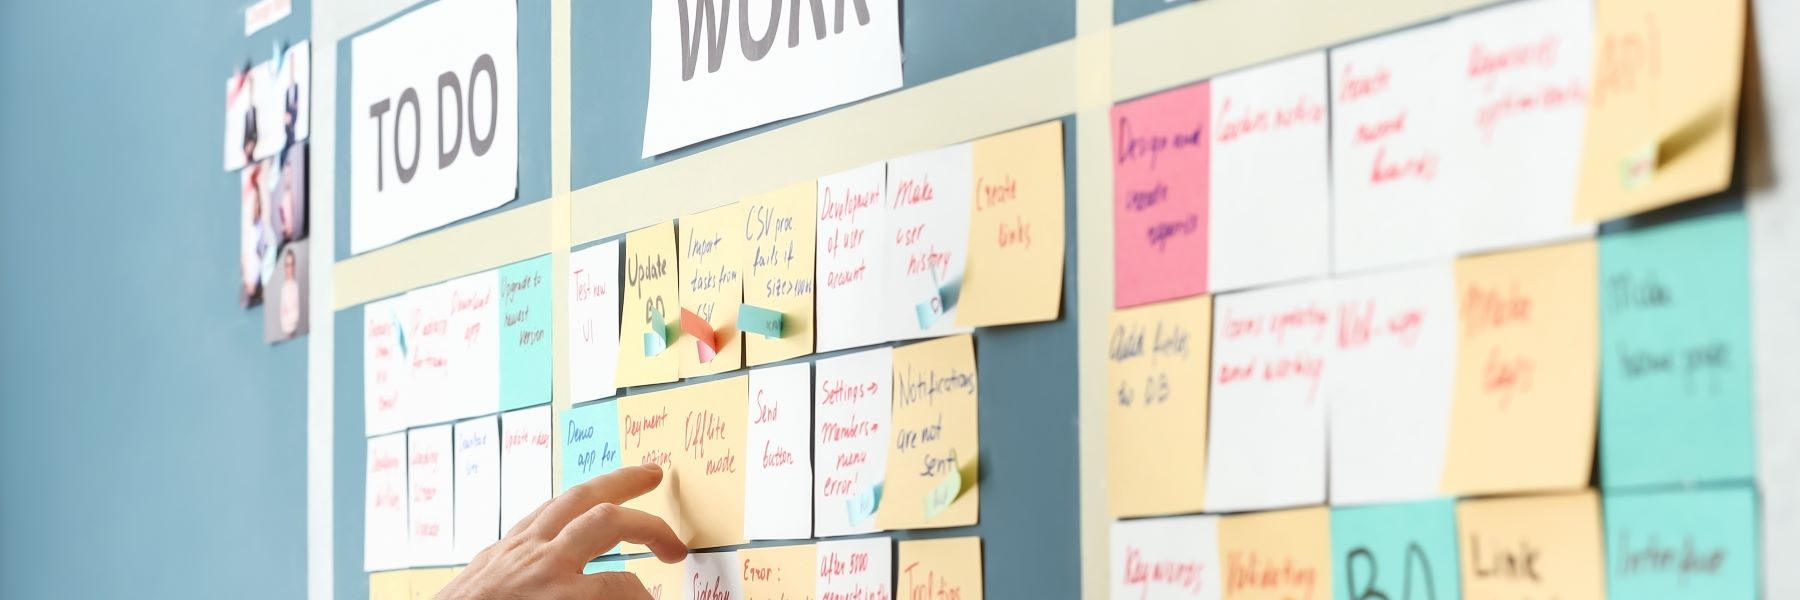 A green board covered with post-it notes. The notes are multiple colors, each with a task written on them. They are arranged, neatly, in a grid. There are two columns visible, to do and work. Someone points at one of the post-it notes.